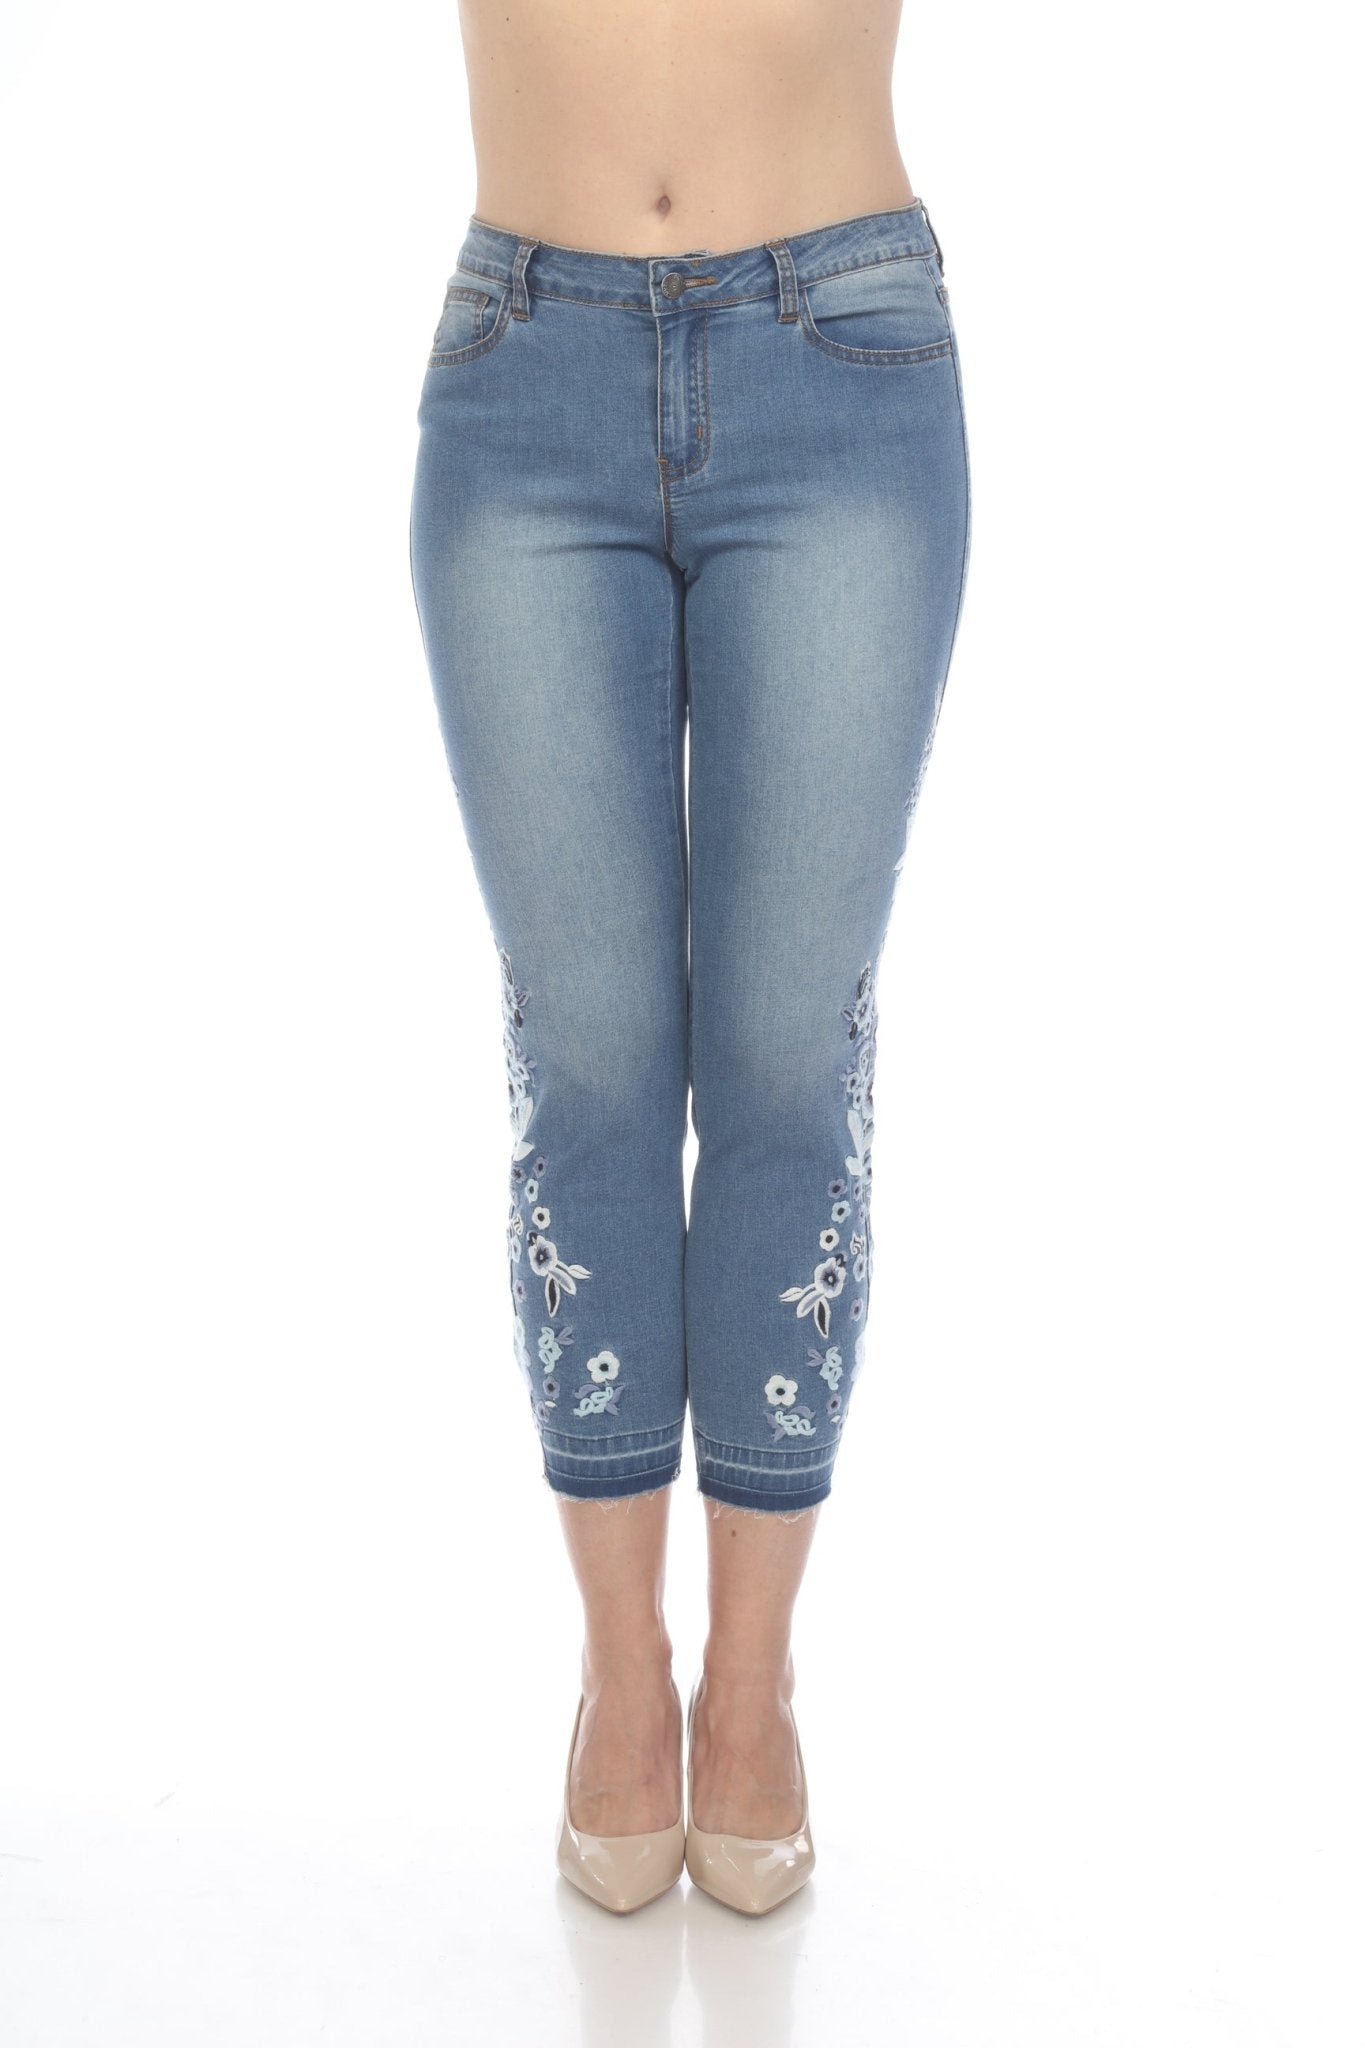 Azi Jeans Women's Flair Bright Floral Embroidered Jeans 14 / Denim